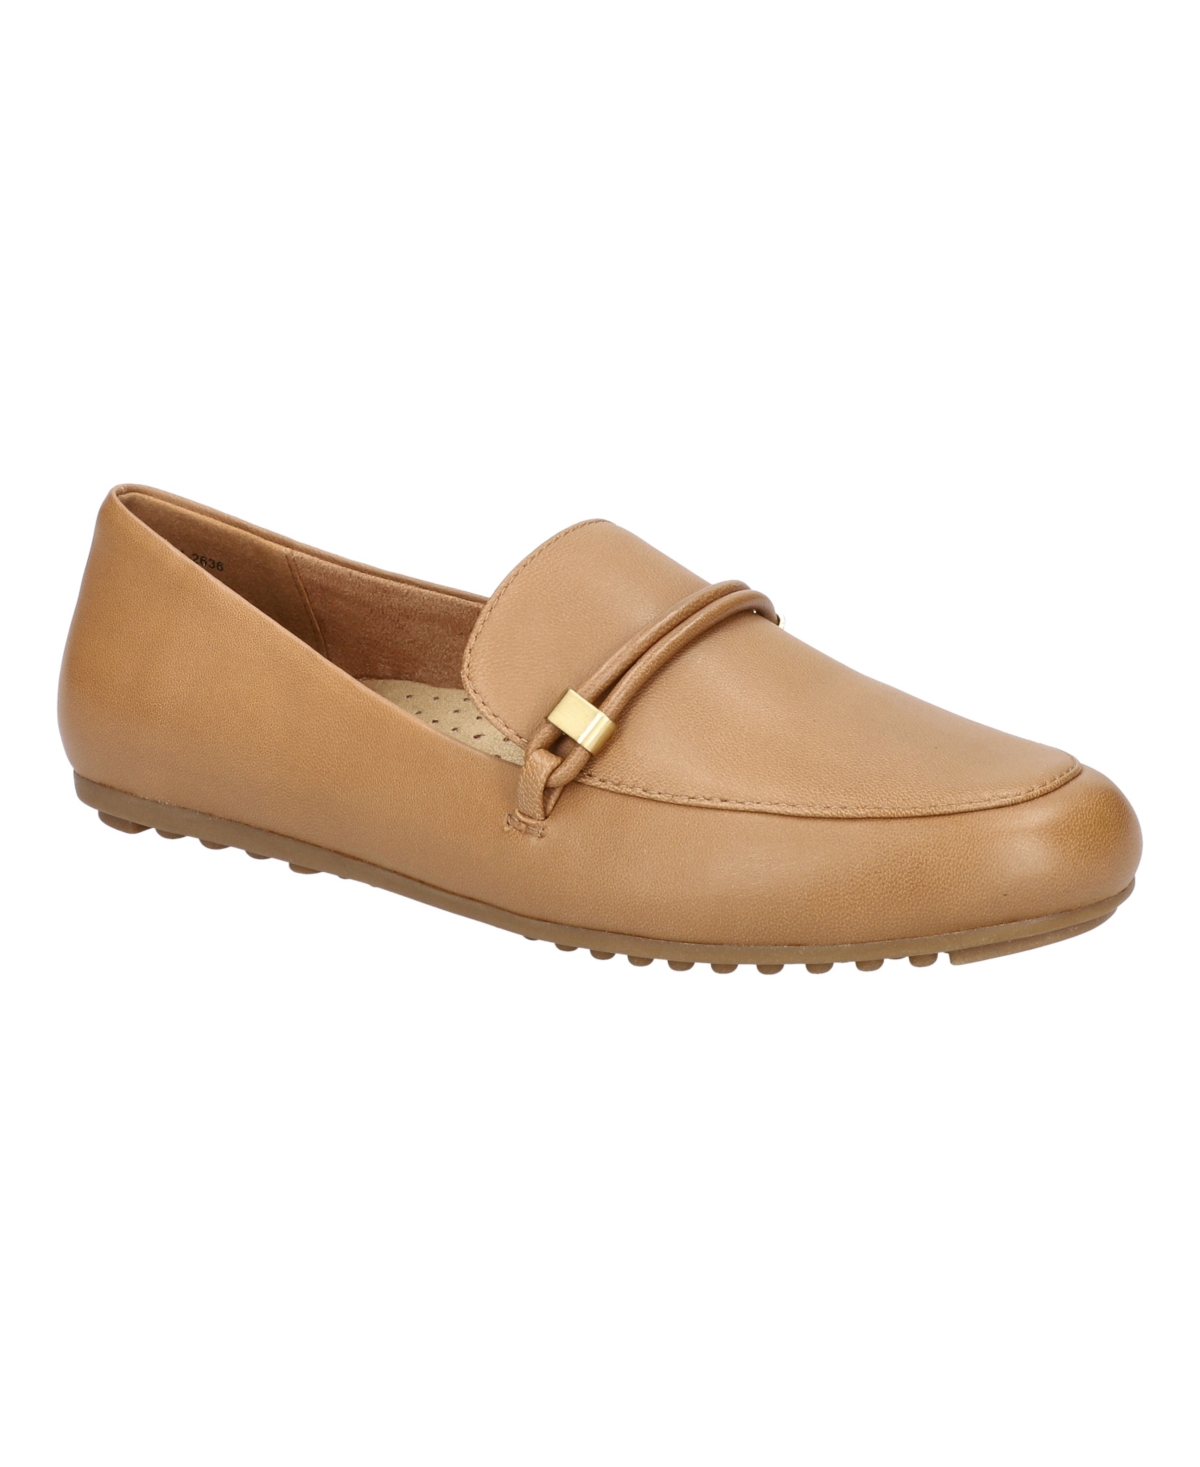 Women's Jerrica Comfort Loafers - Saddle Leather